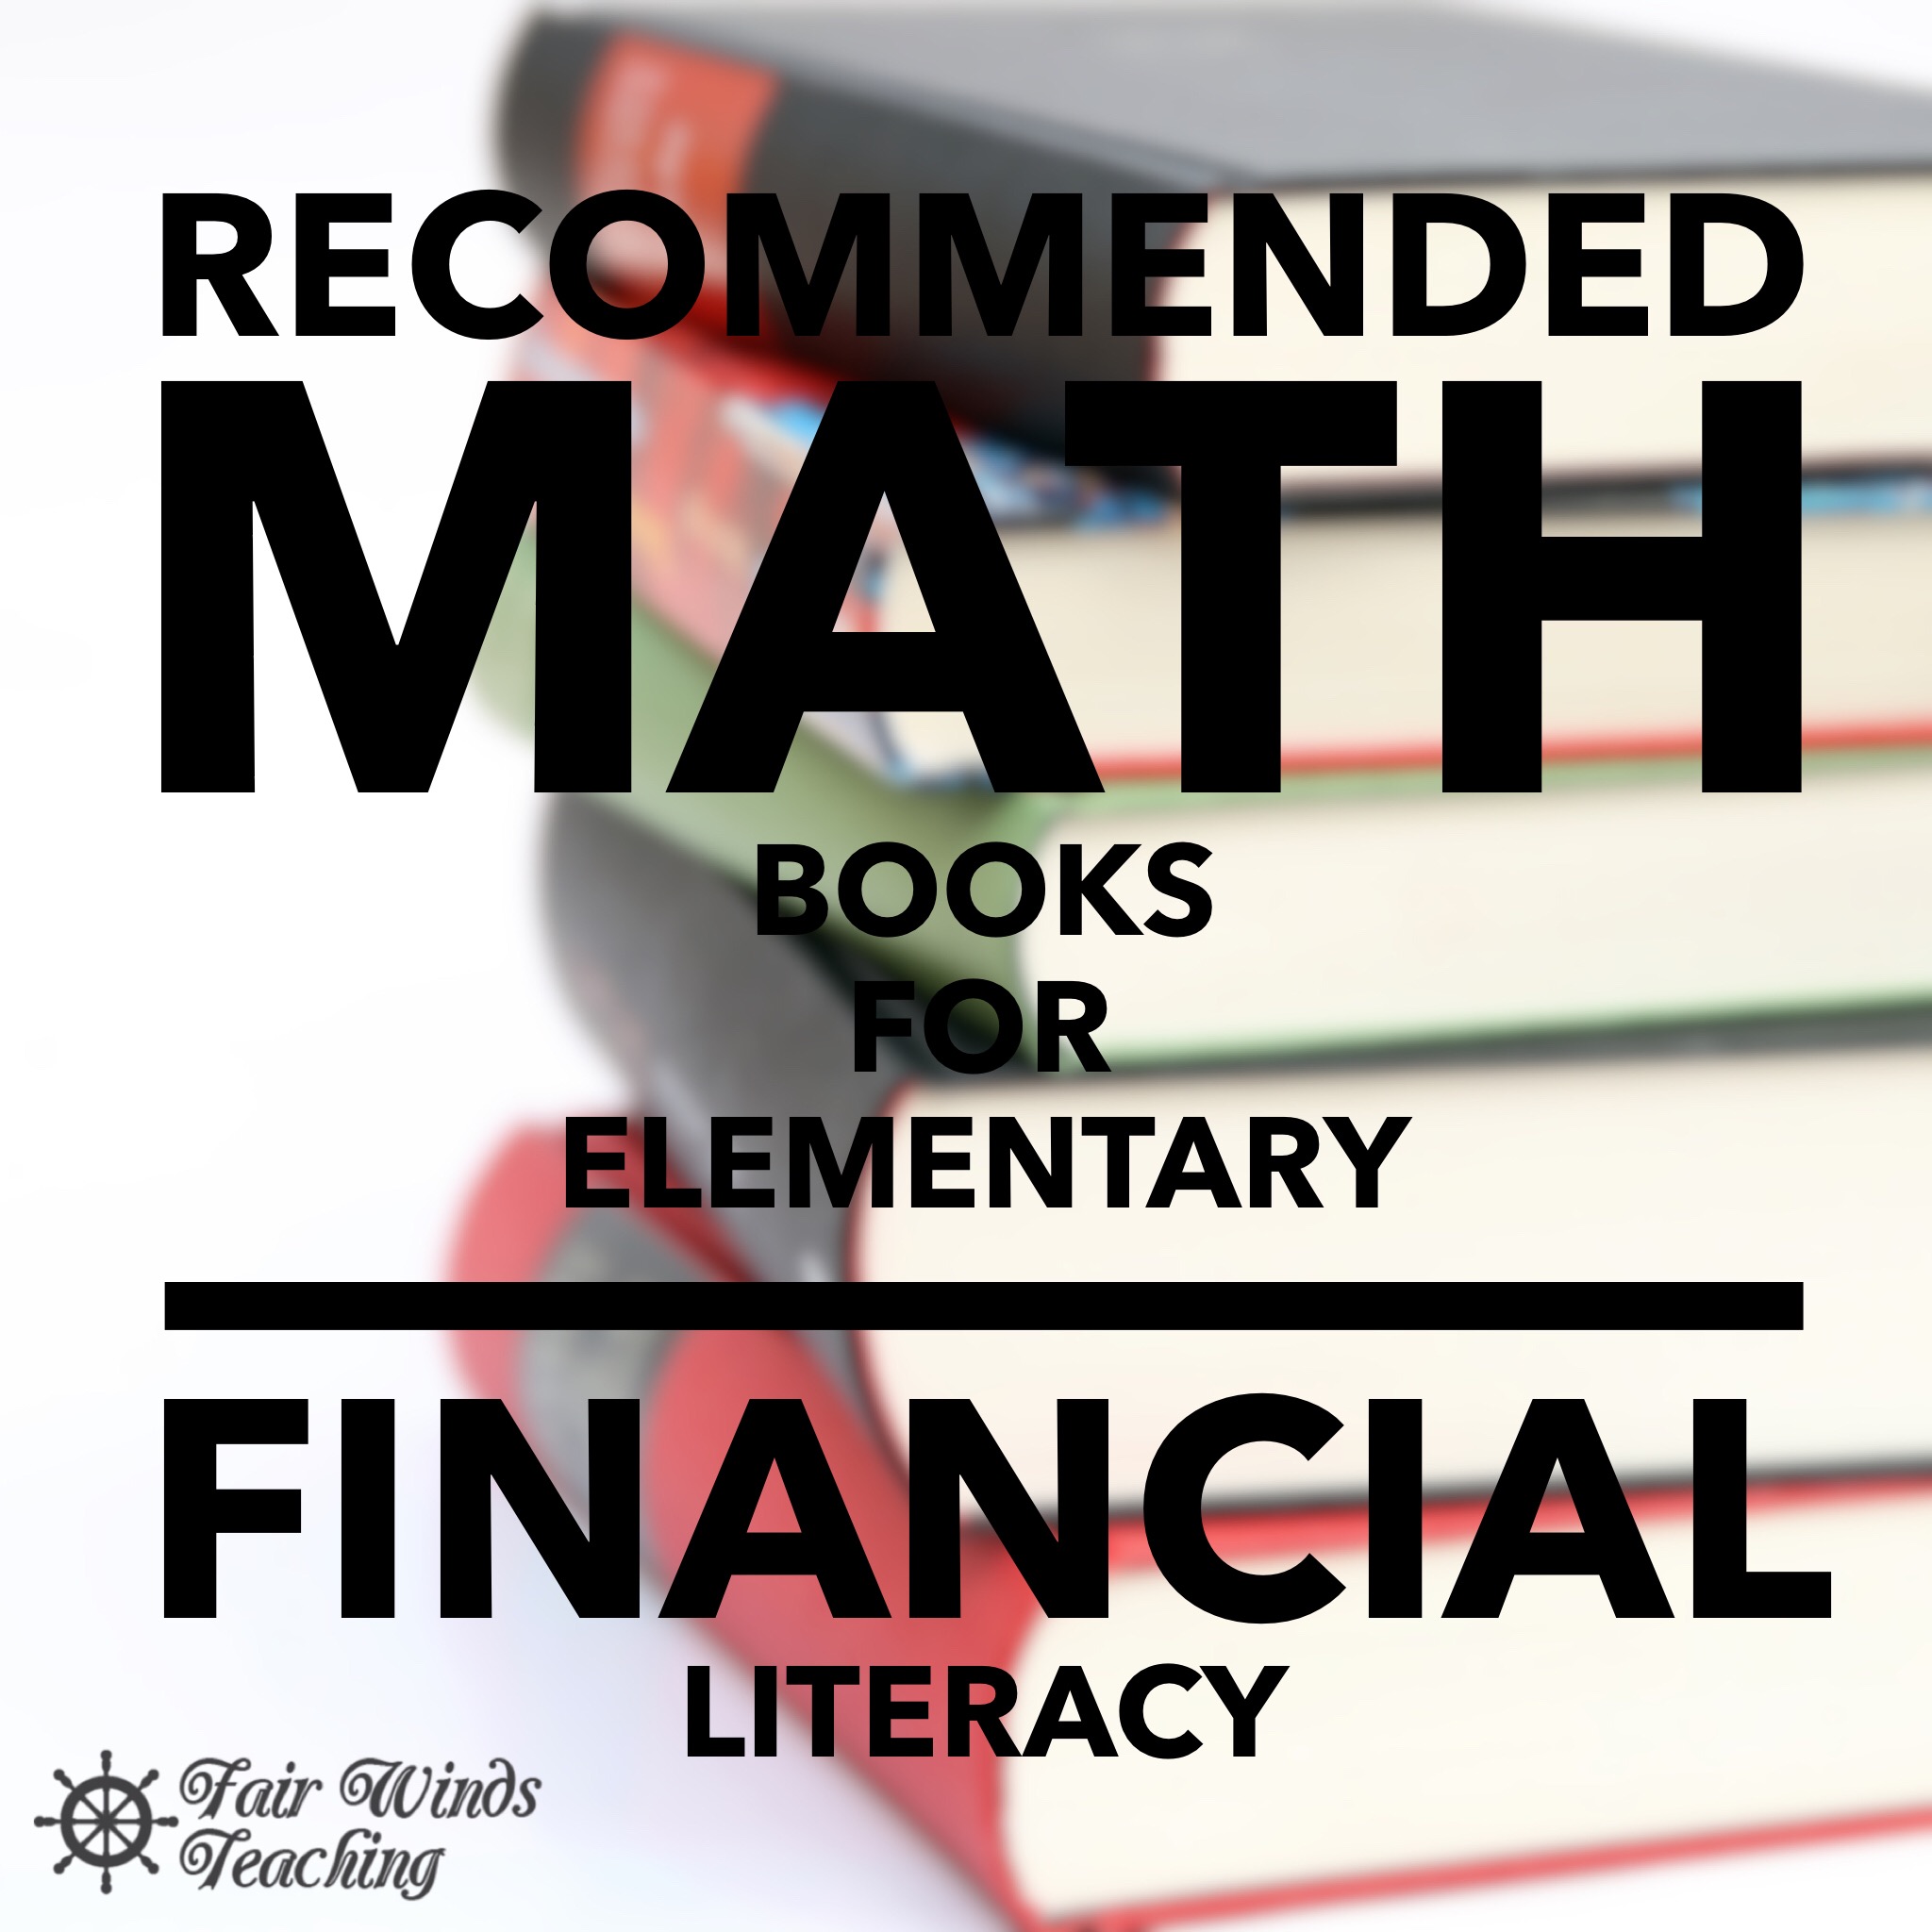 Recommended Math Books for Elementary Financial Literacy